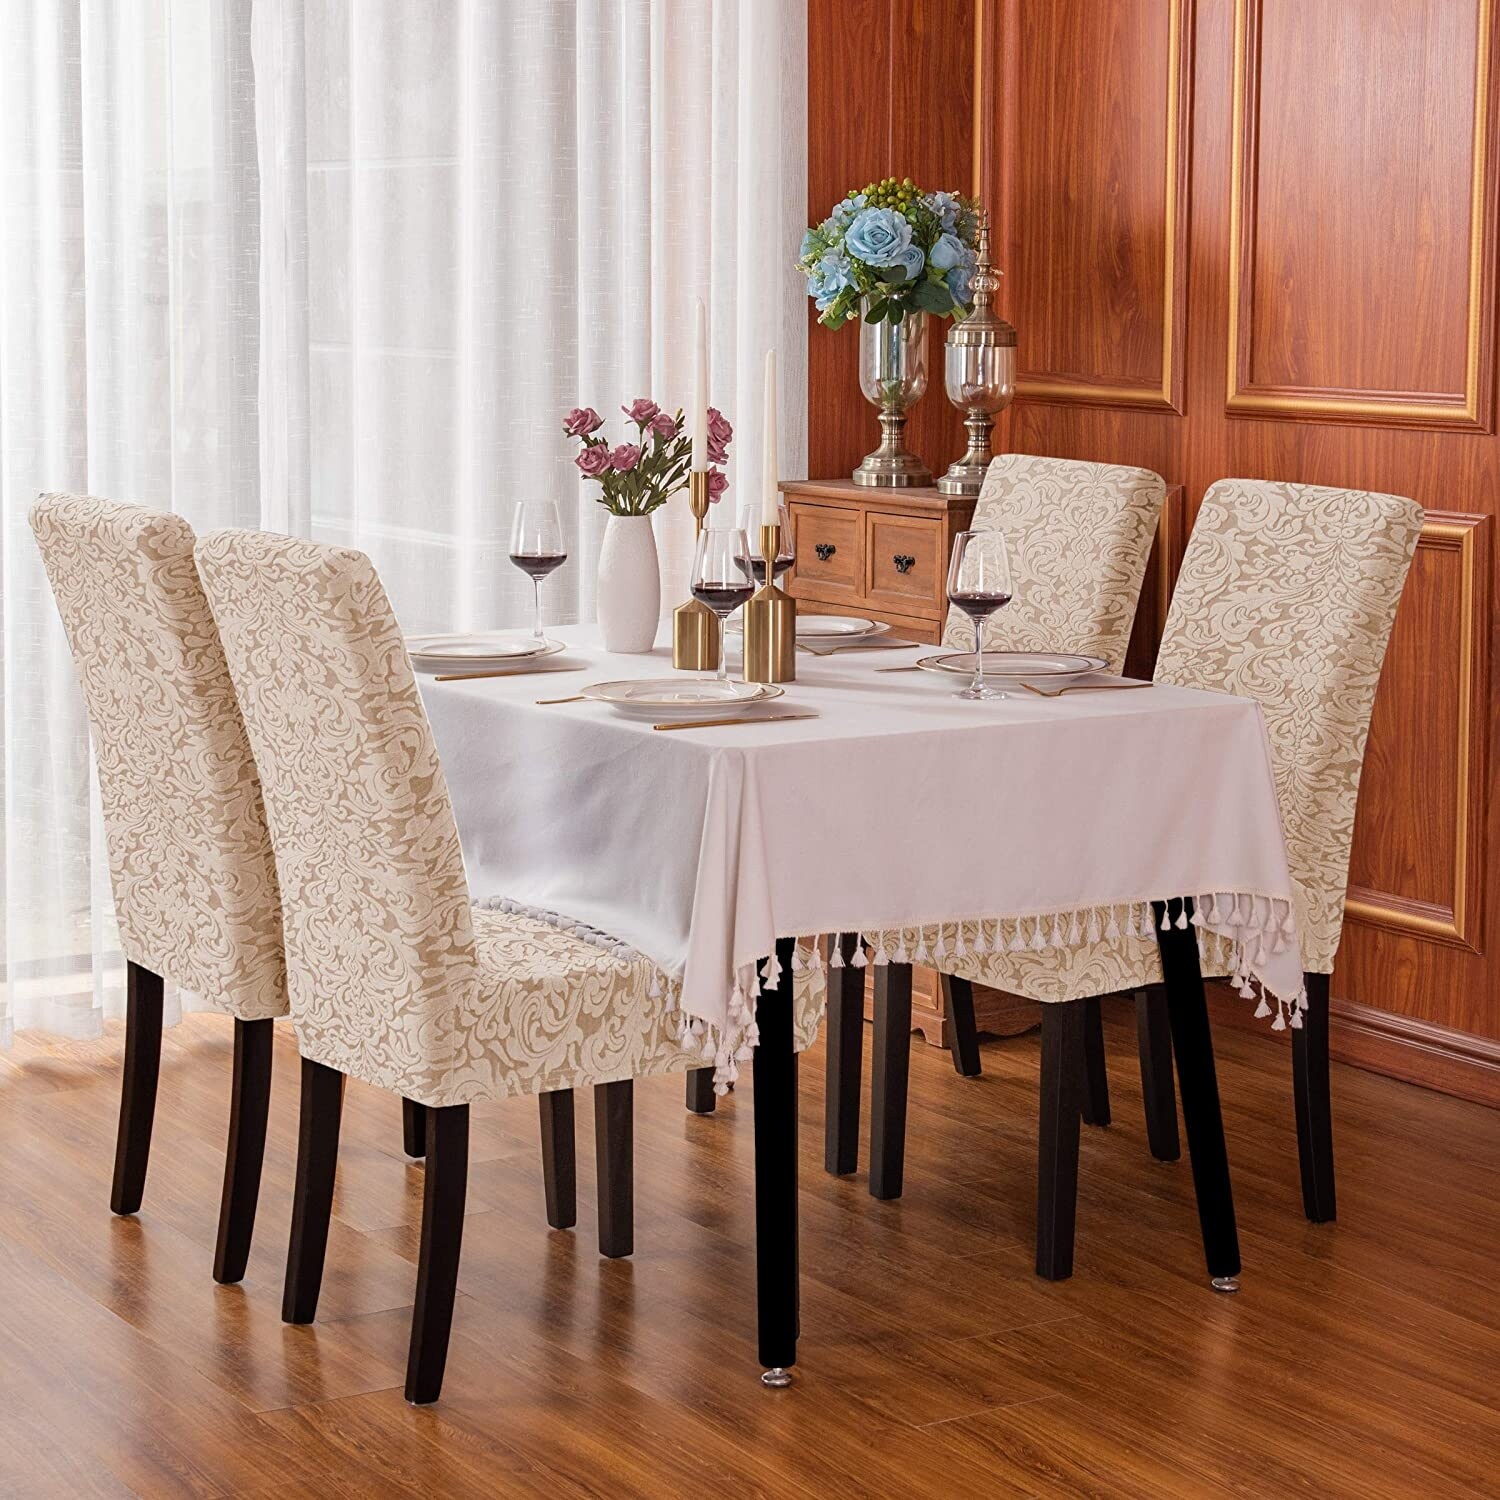 Removable Round Stretch Slipcovers Home Dining Room Decor Thicken Cover @@ 